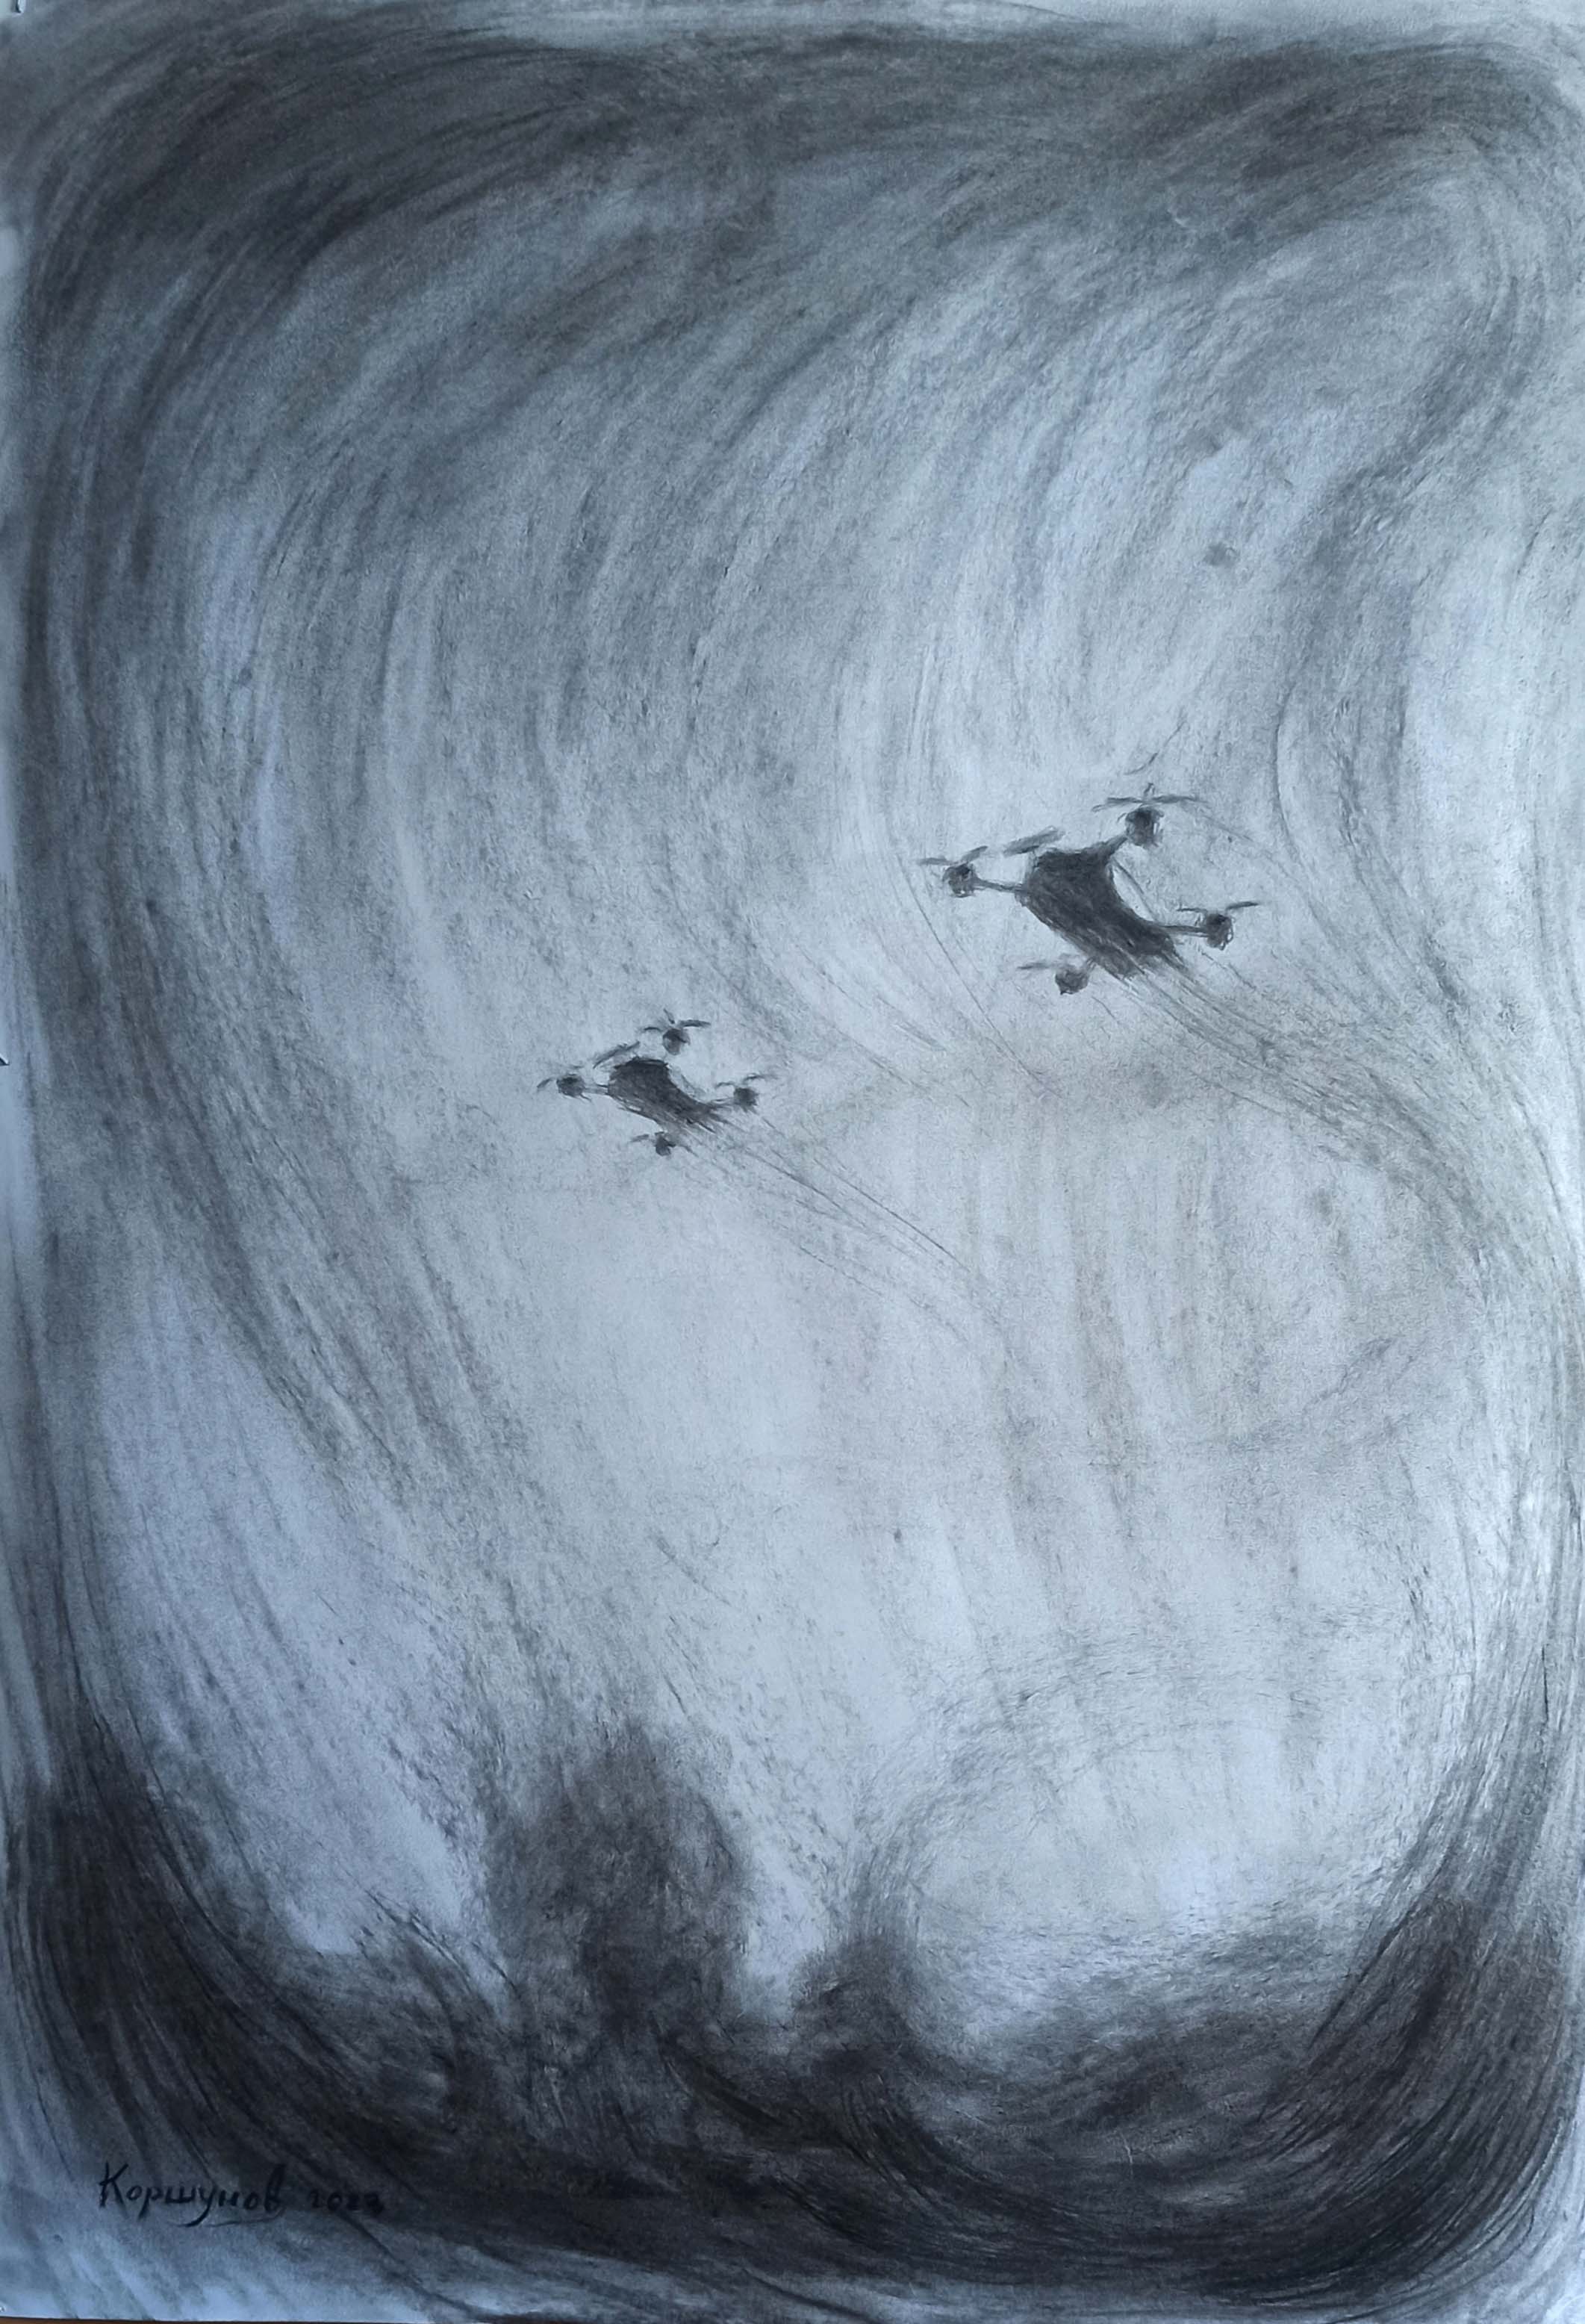 The sky is buzzing, paper, charcoal